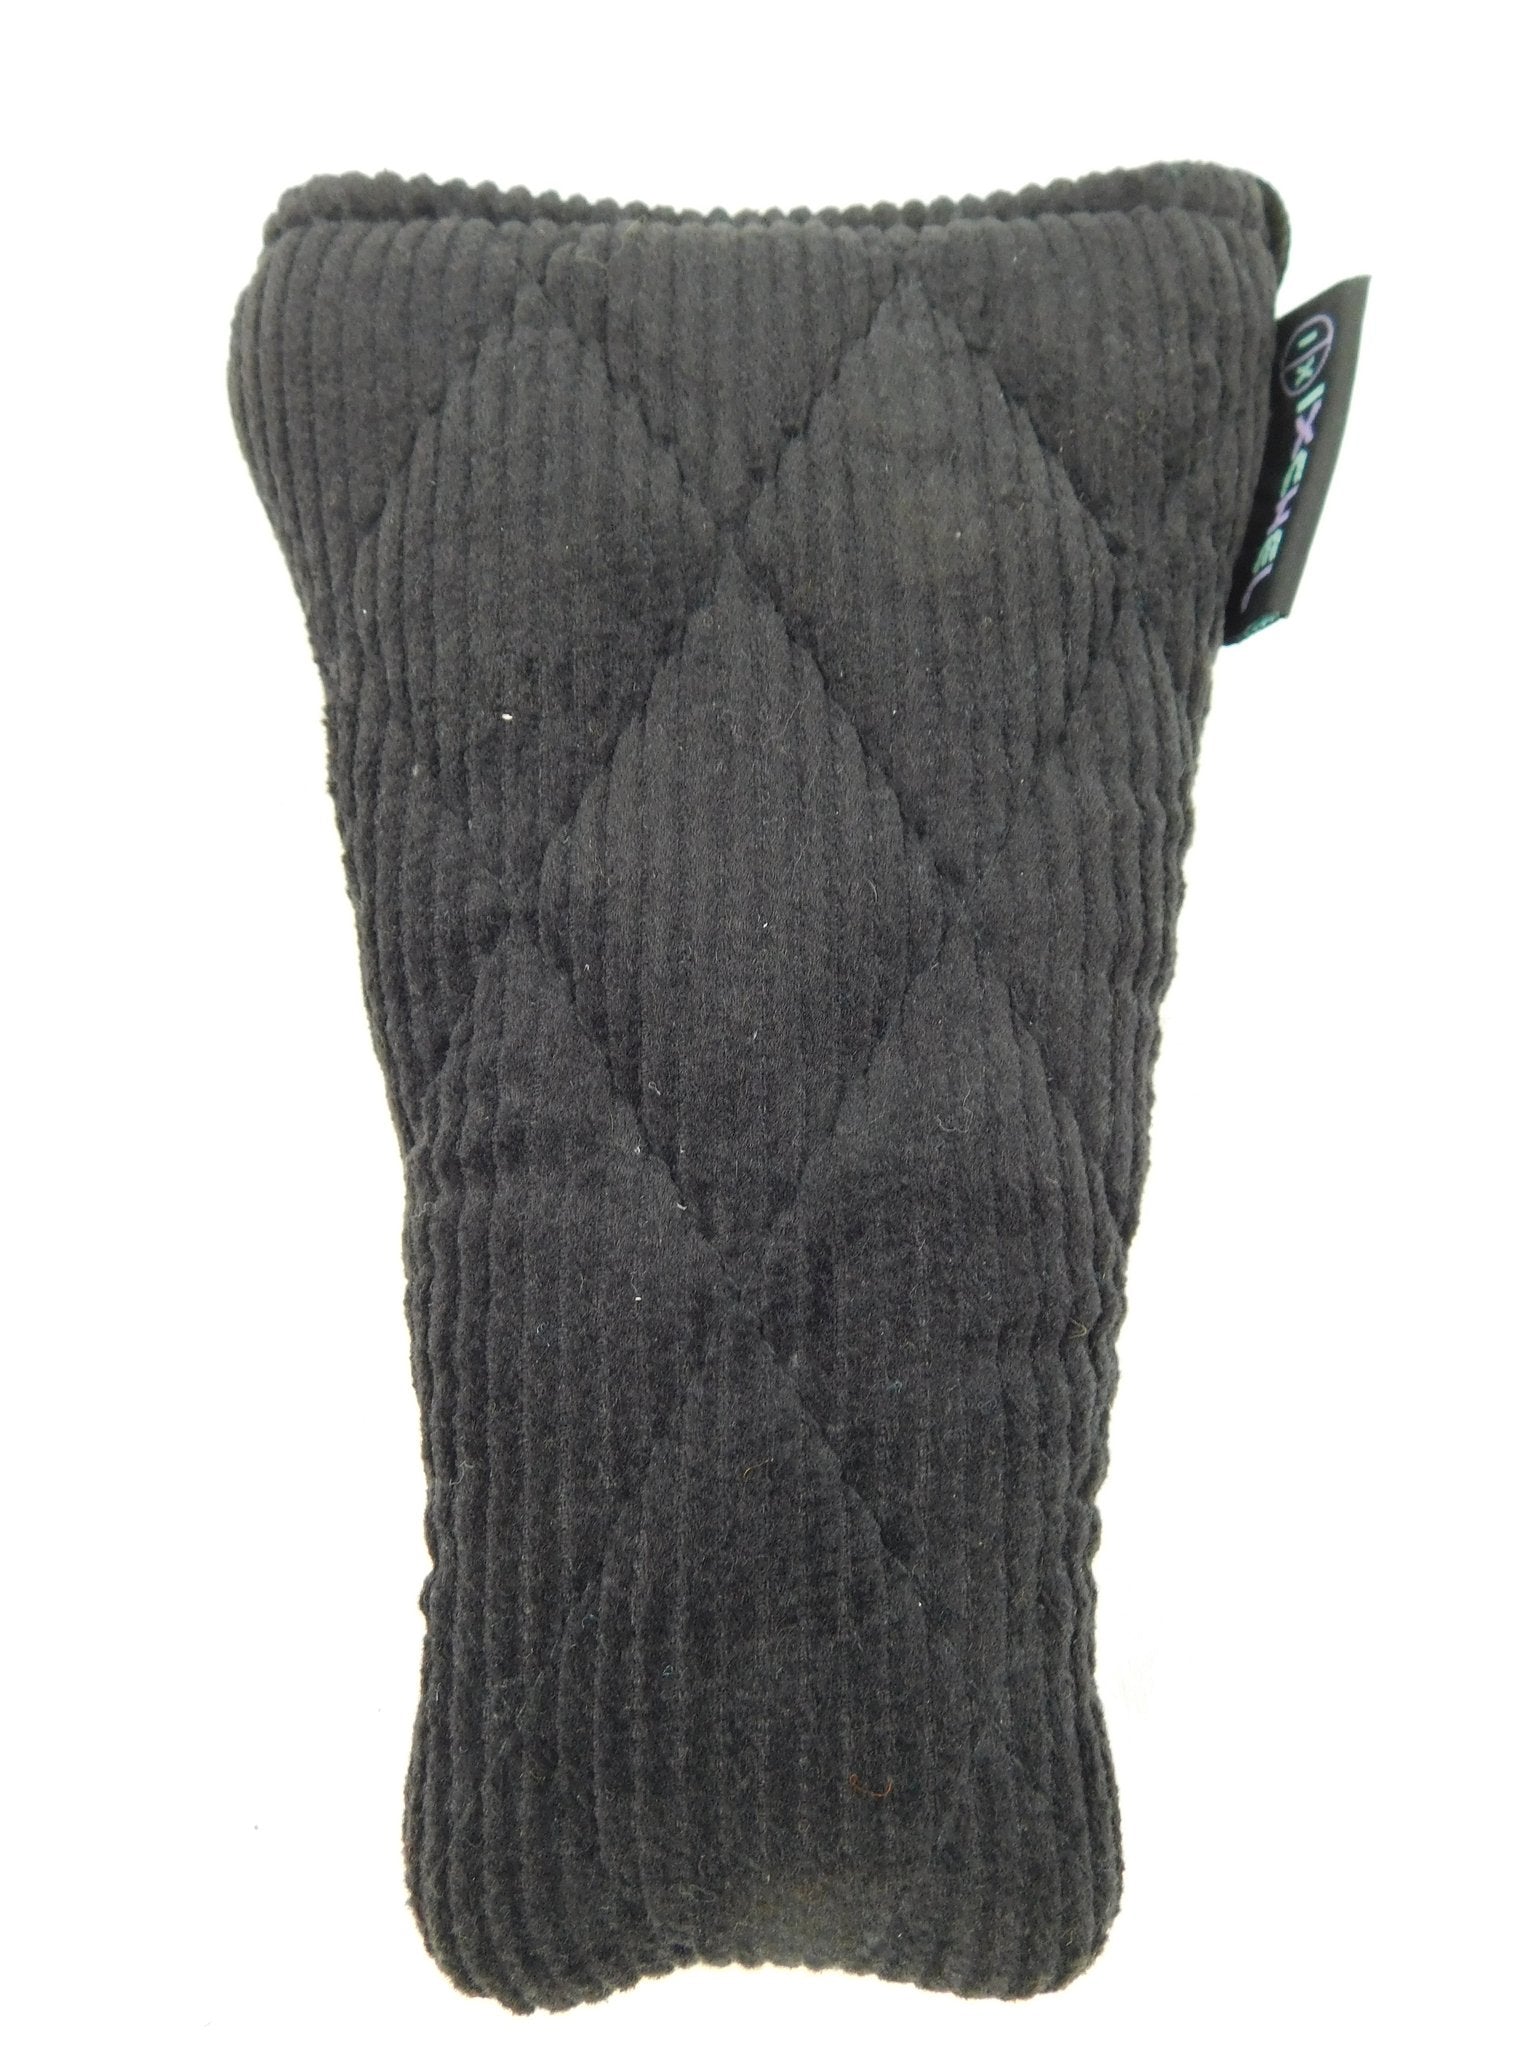 Protective Pouch - Corduroy 6.5" Holster